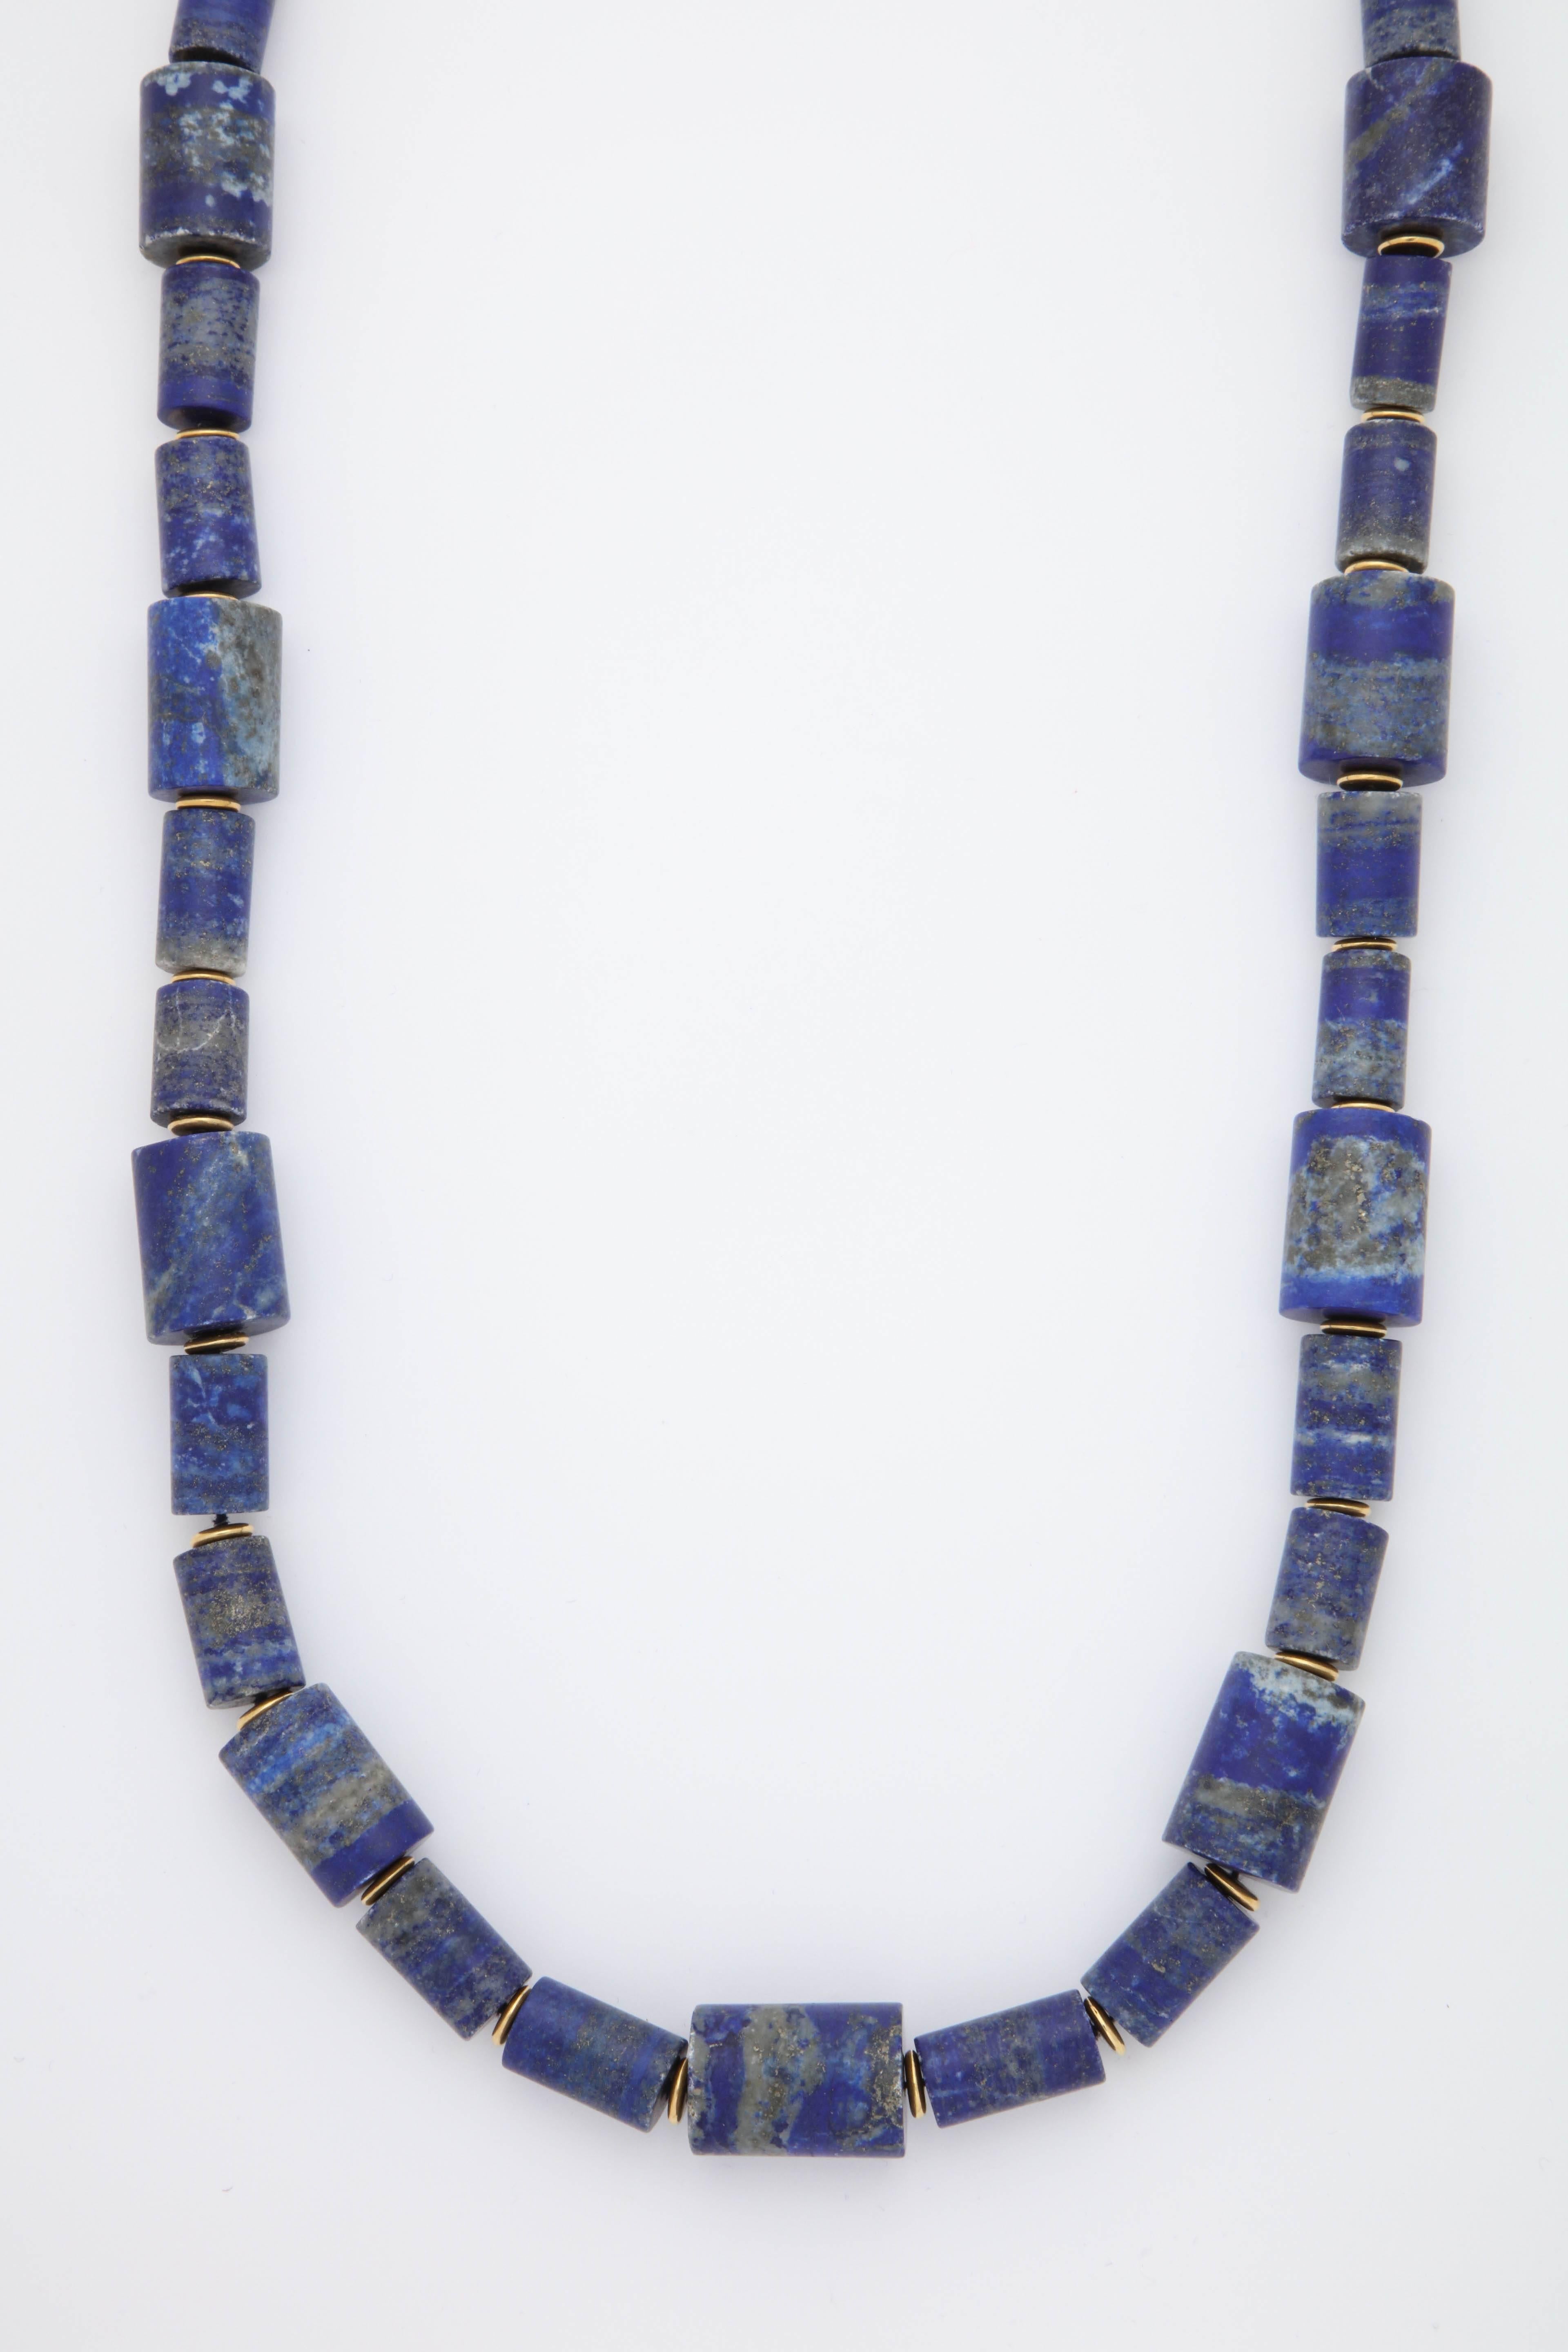 A necklace composed of alternating honed lapis lazuli barrel beads and 18kt yellow gold button beads.

Length: 38.50 inches